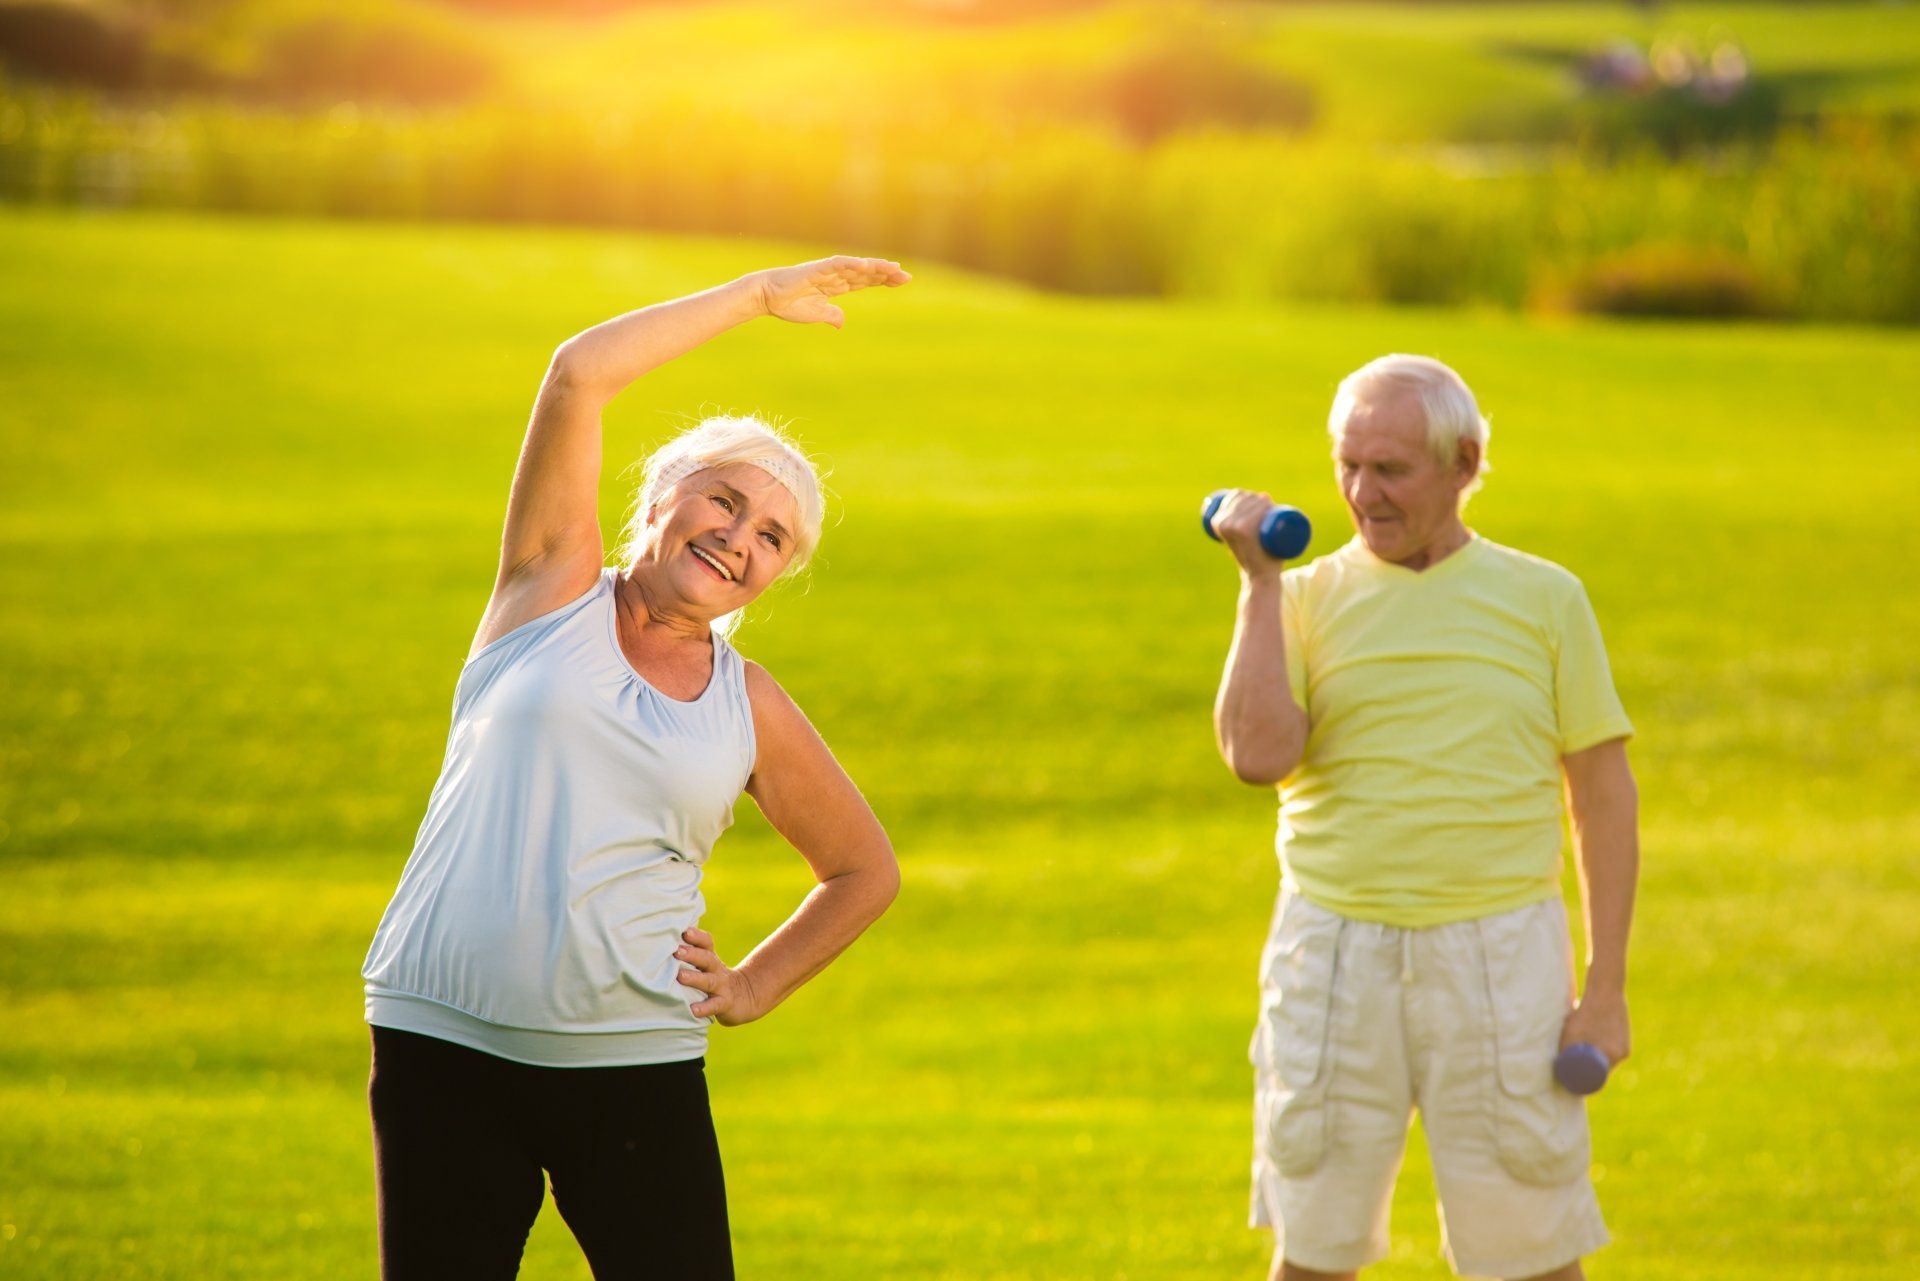 Elderly man and woman doing exercise